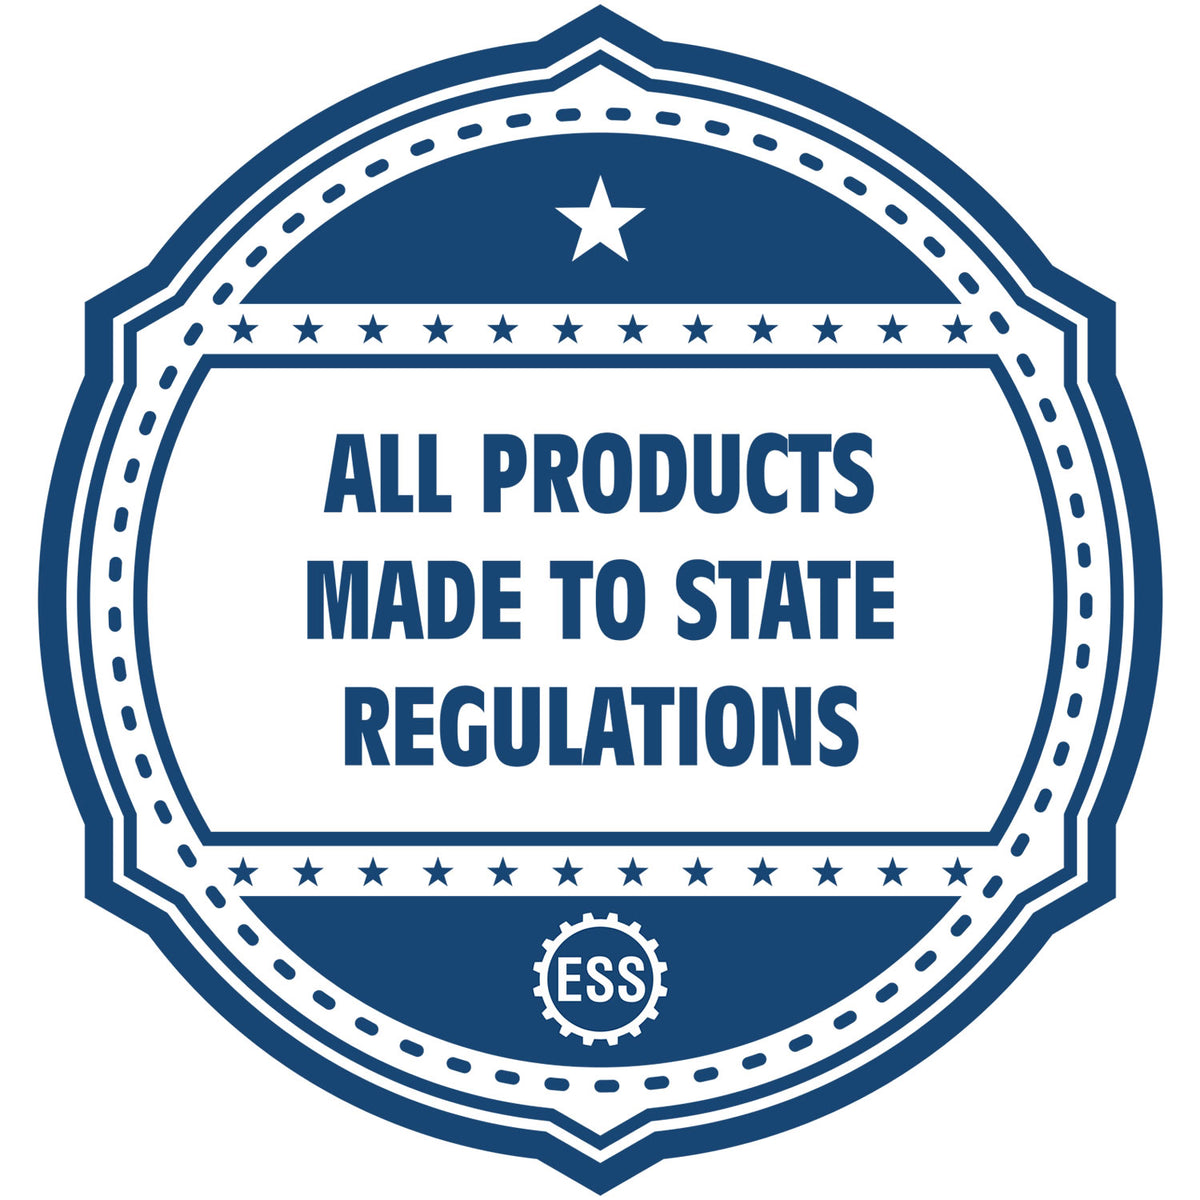 An icon or badge element for the Missouri Desk Architect Embossing Seal showing that this product is made in compliance with state regulations.